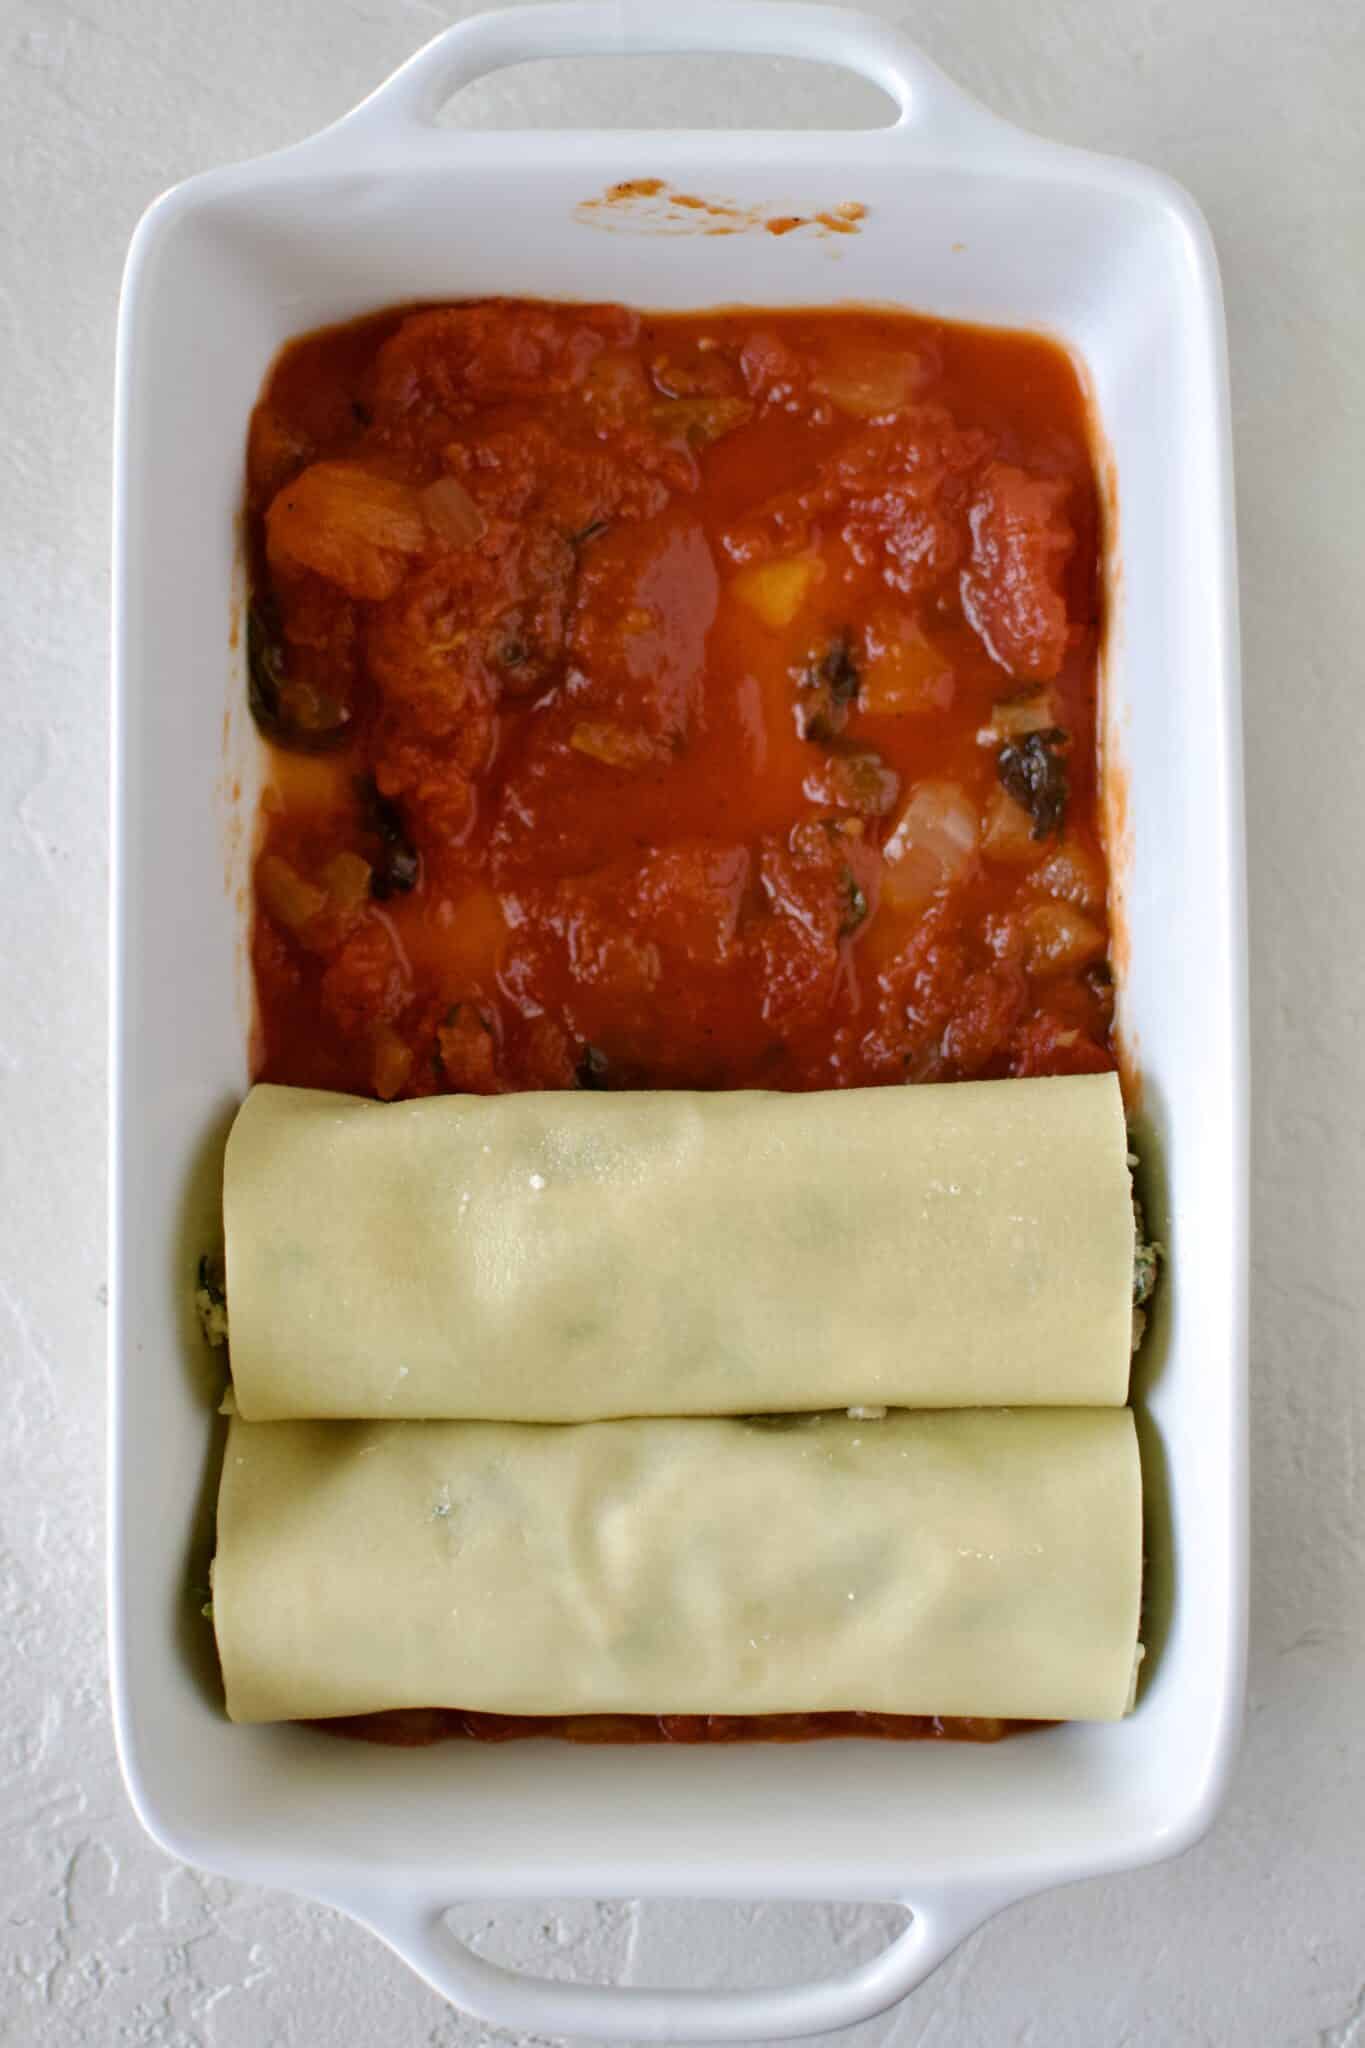 Lining up filled manicotti in a dish lined with red sauce.